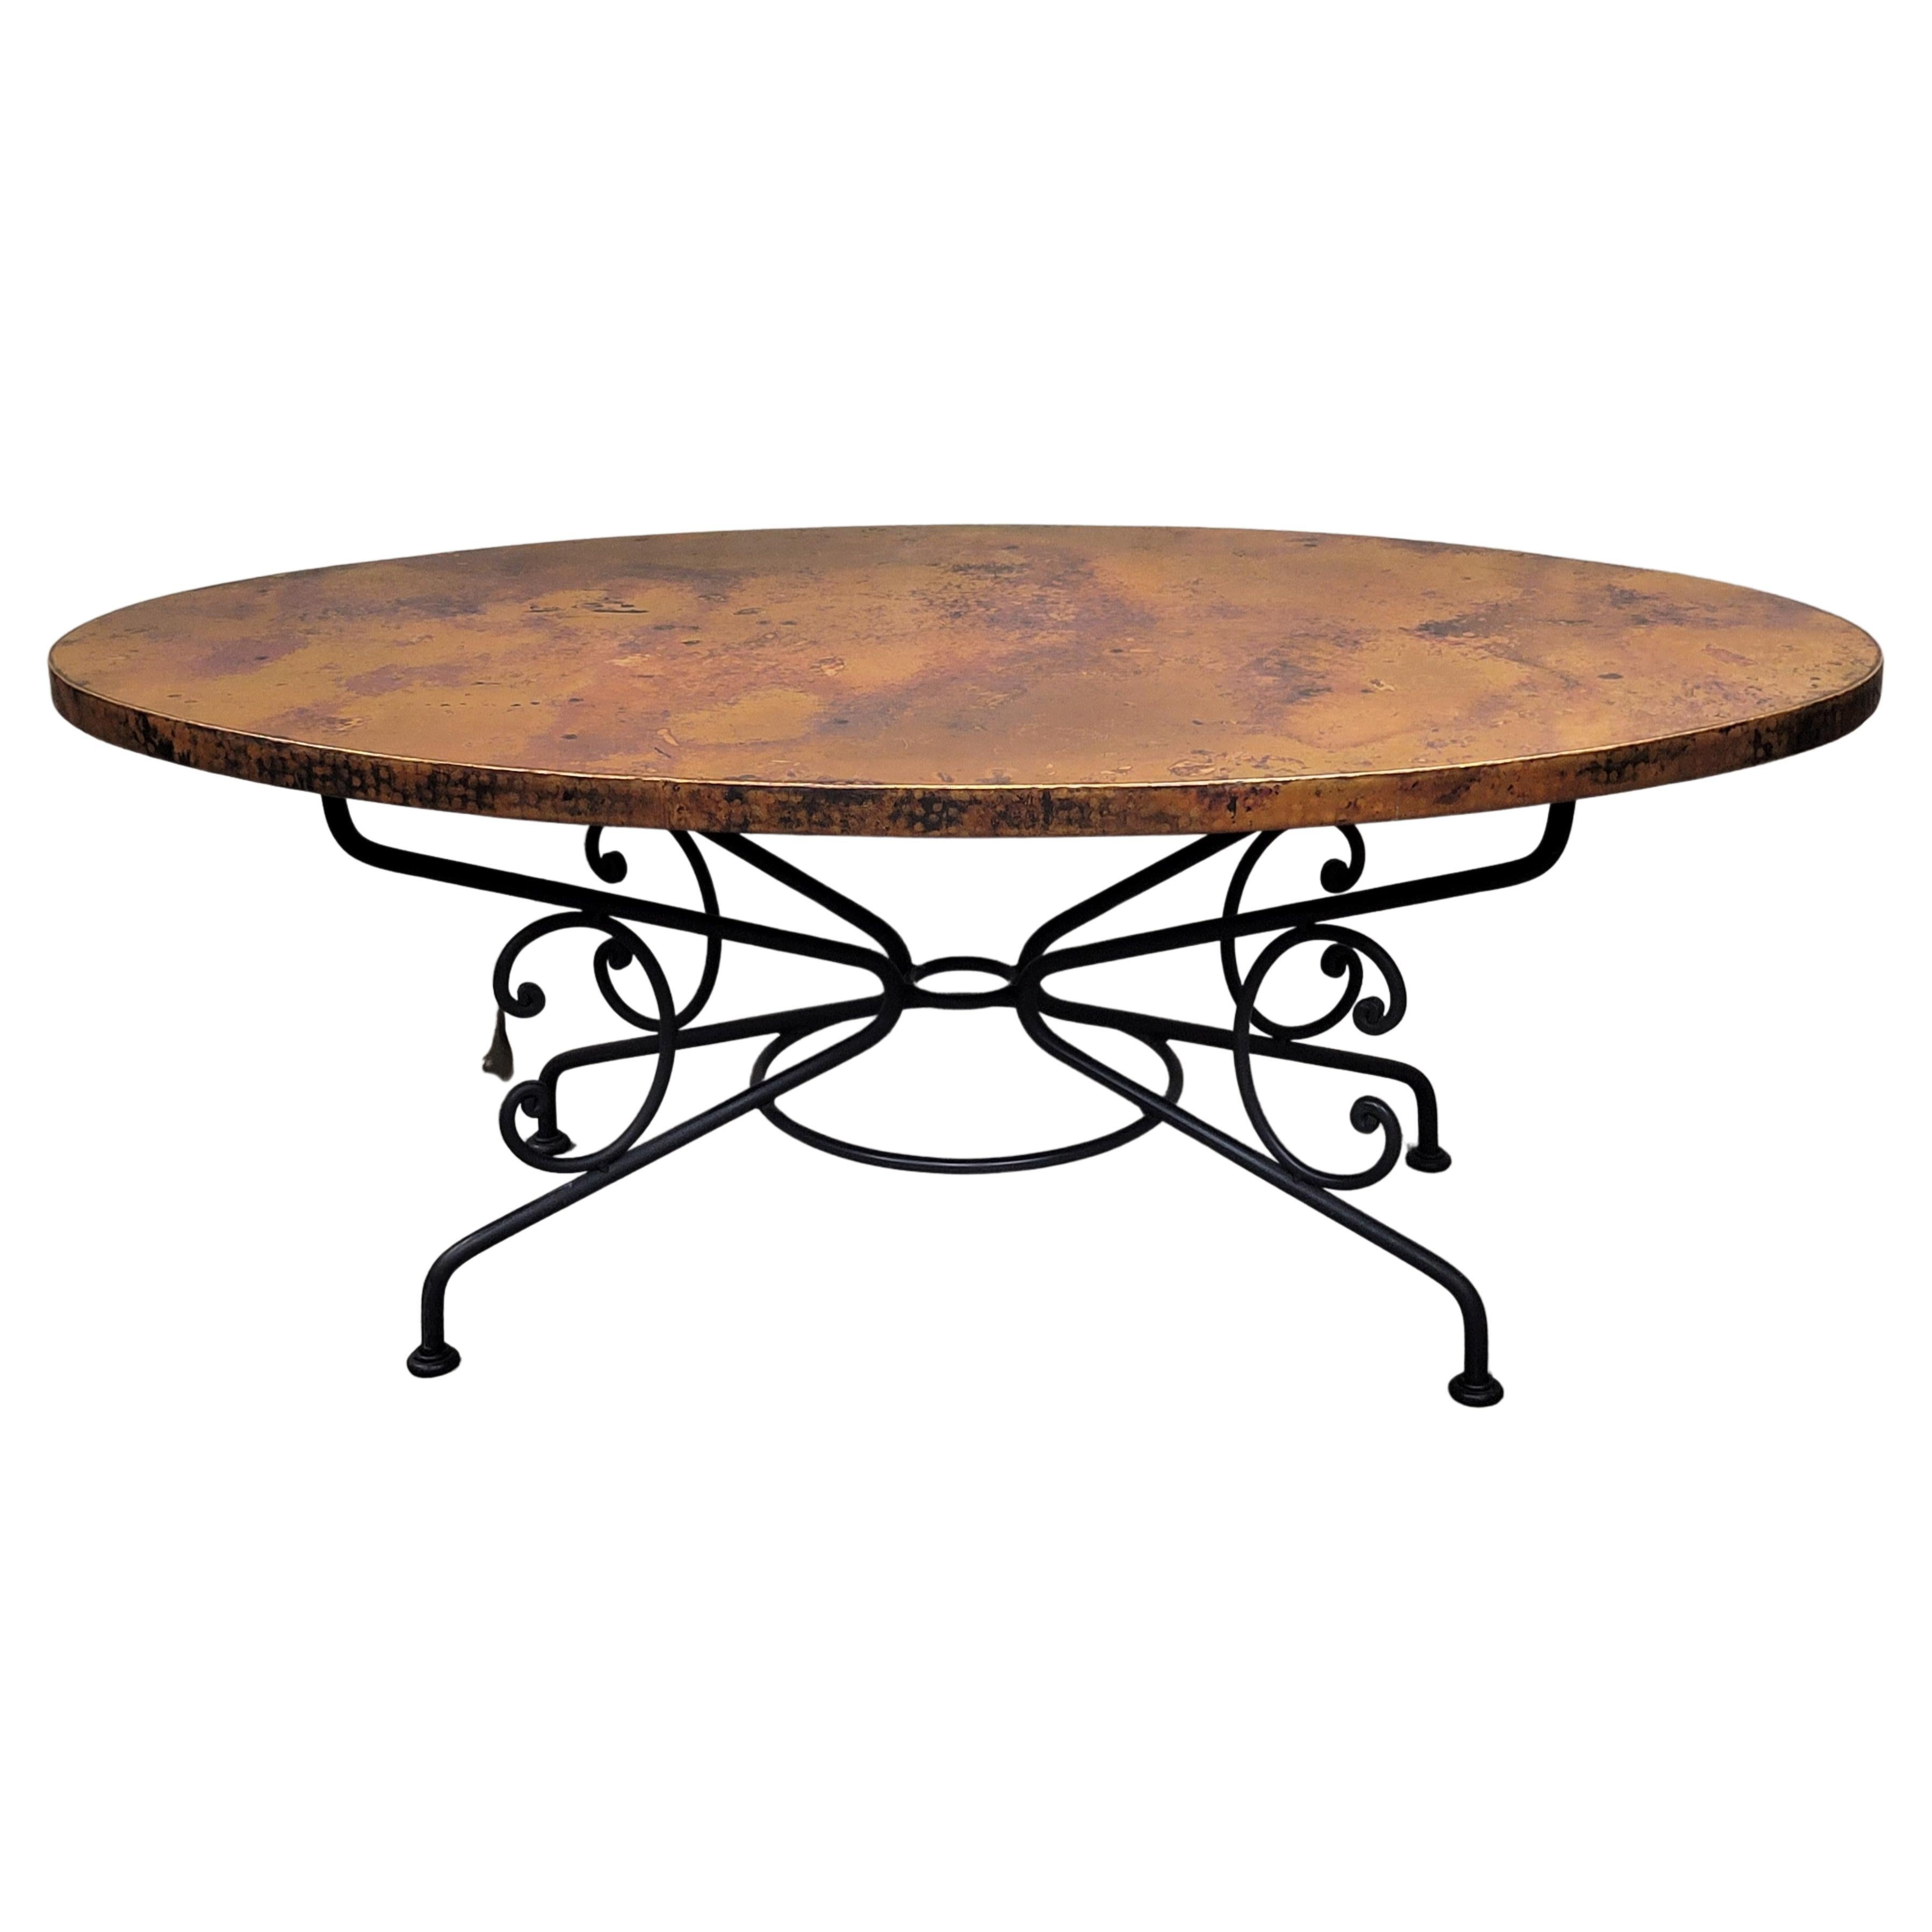 Arhaus Dining Table With Hammered Copper Top and Iron Arabesque Base